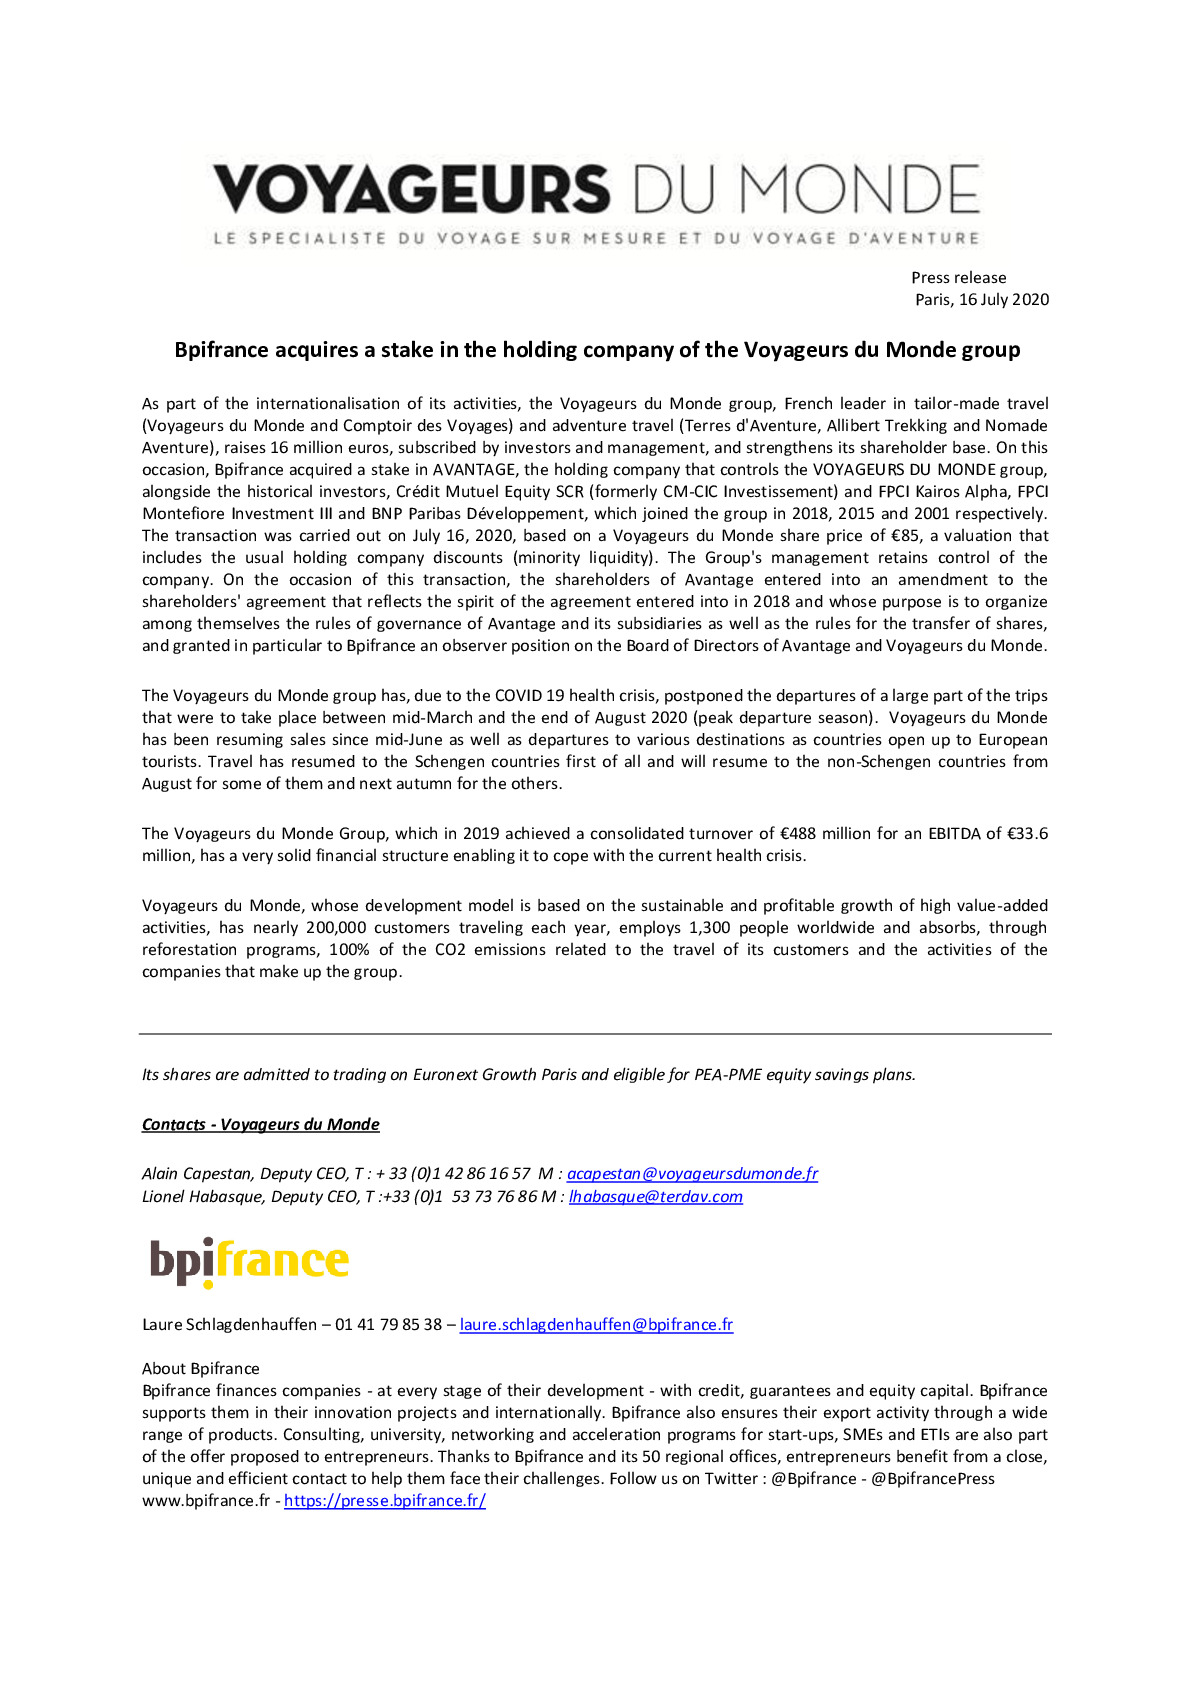 Press release Bpifrance acquires a stake in the holding of Voyageurs du Monde group 16-7-2020-pdf